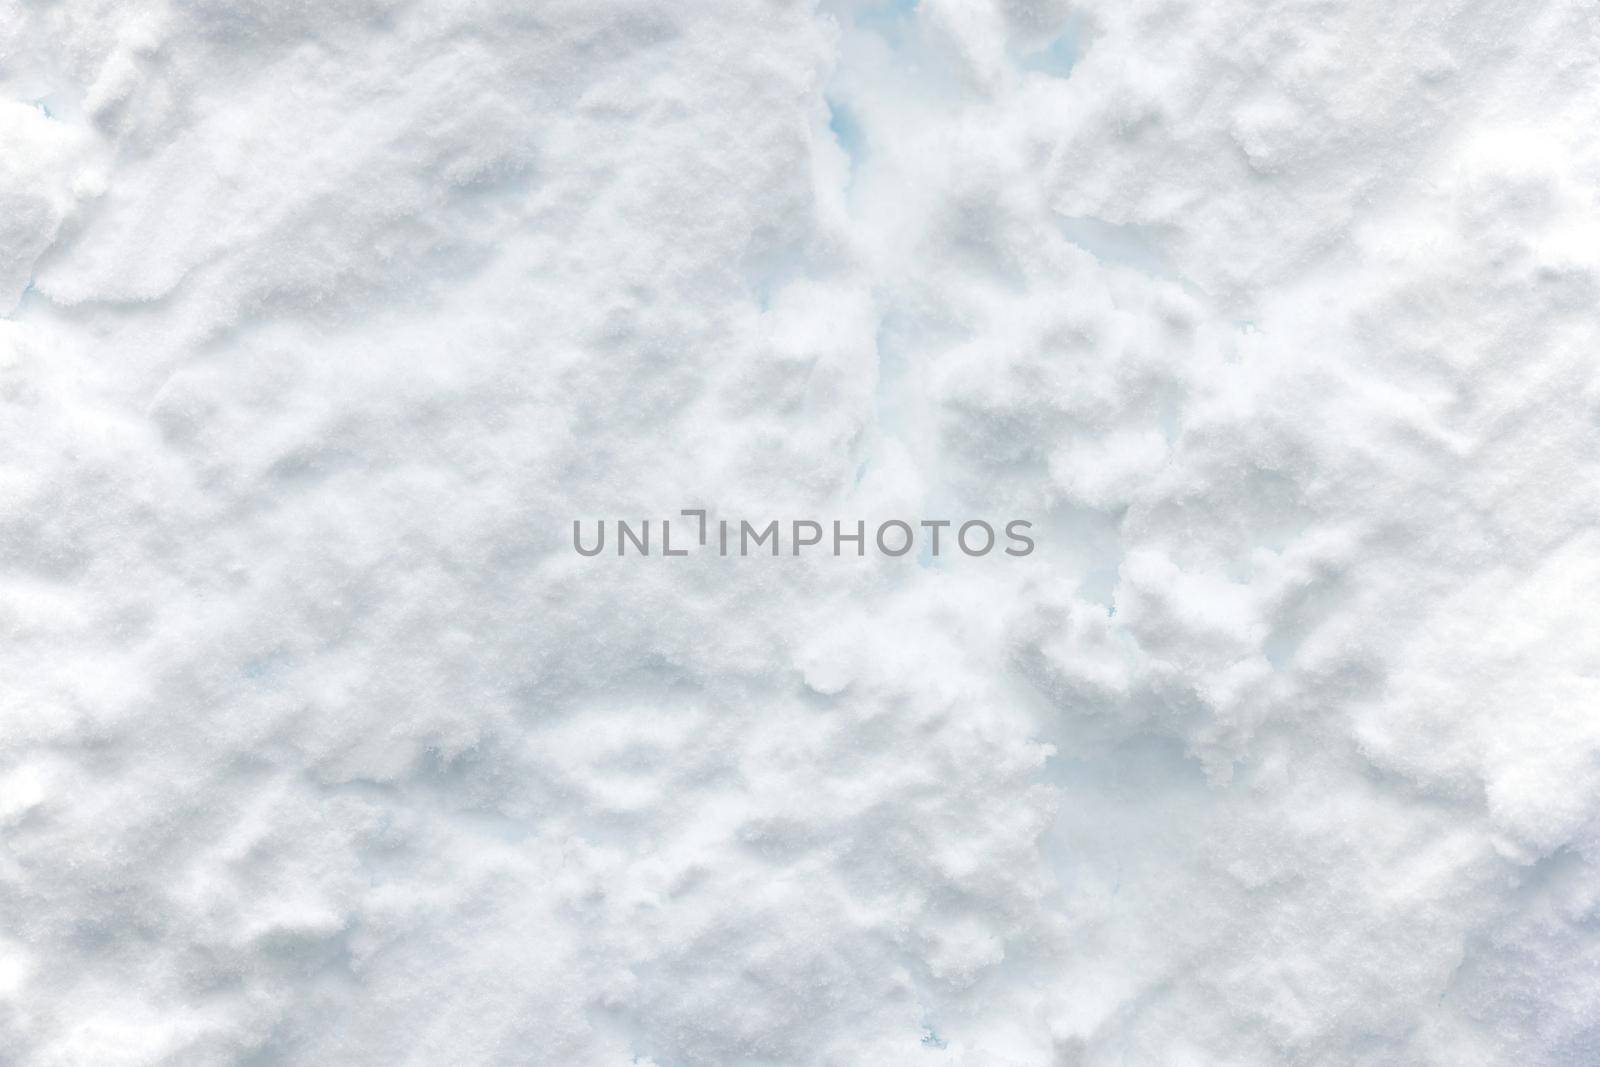 Wall of snow. Snowdrift surface, Winter background. The texture of snow removed with a bucket. Removed compressed snow by EvgeniyQW